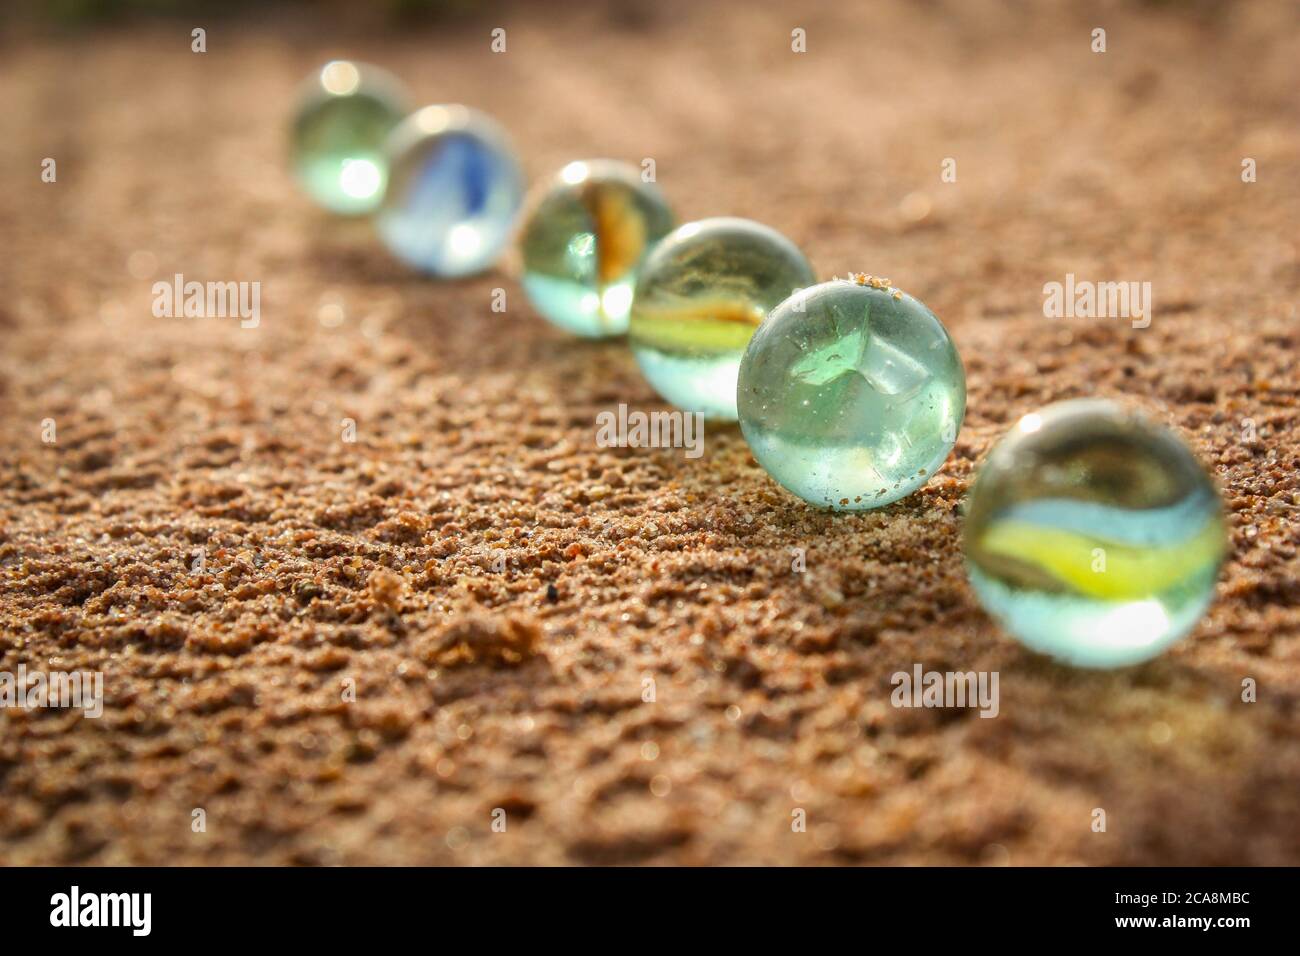 you can see marbles lined up on the sand floor Stock Photo